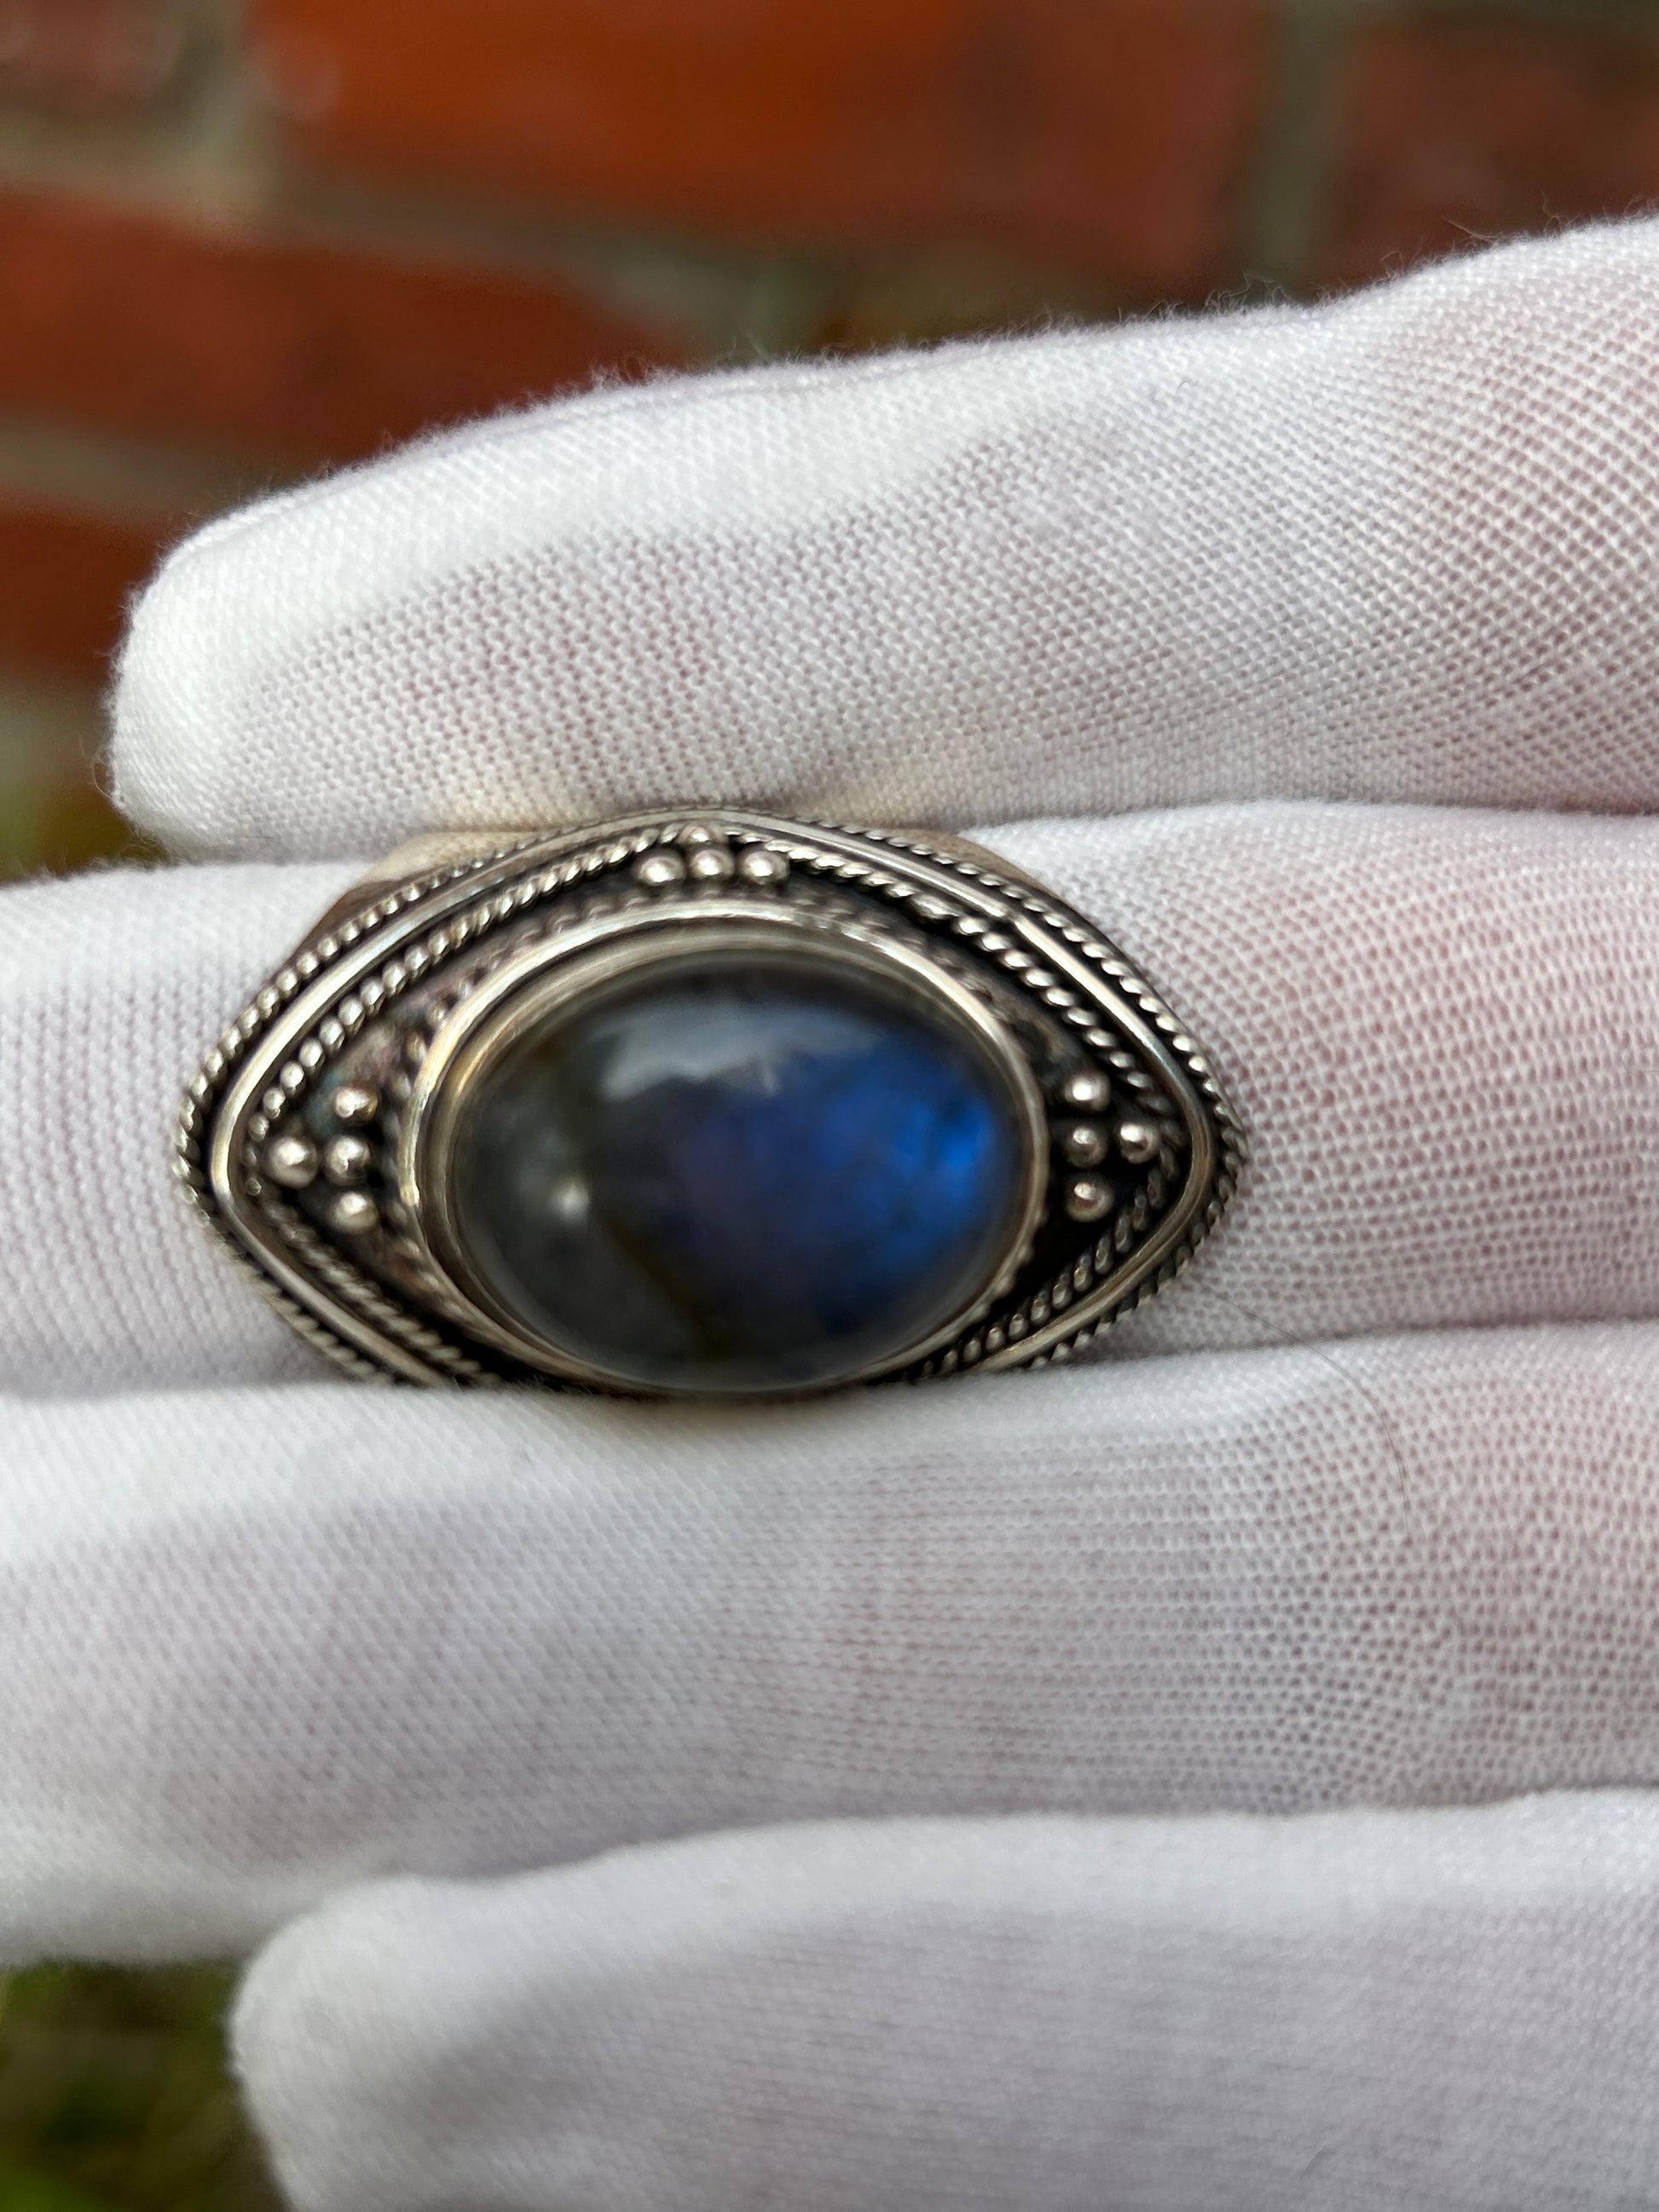 Blue flash labradorite polished crystal oval ring in antique 925 sterling silver ornate setting  size 7